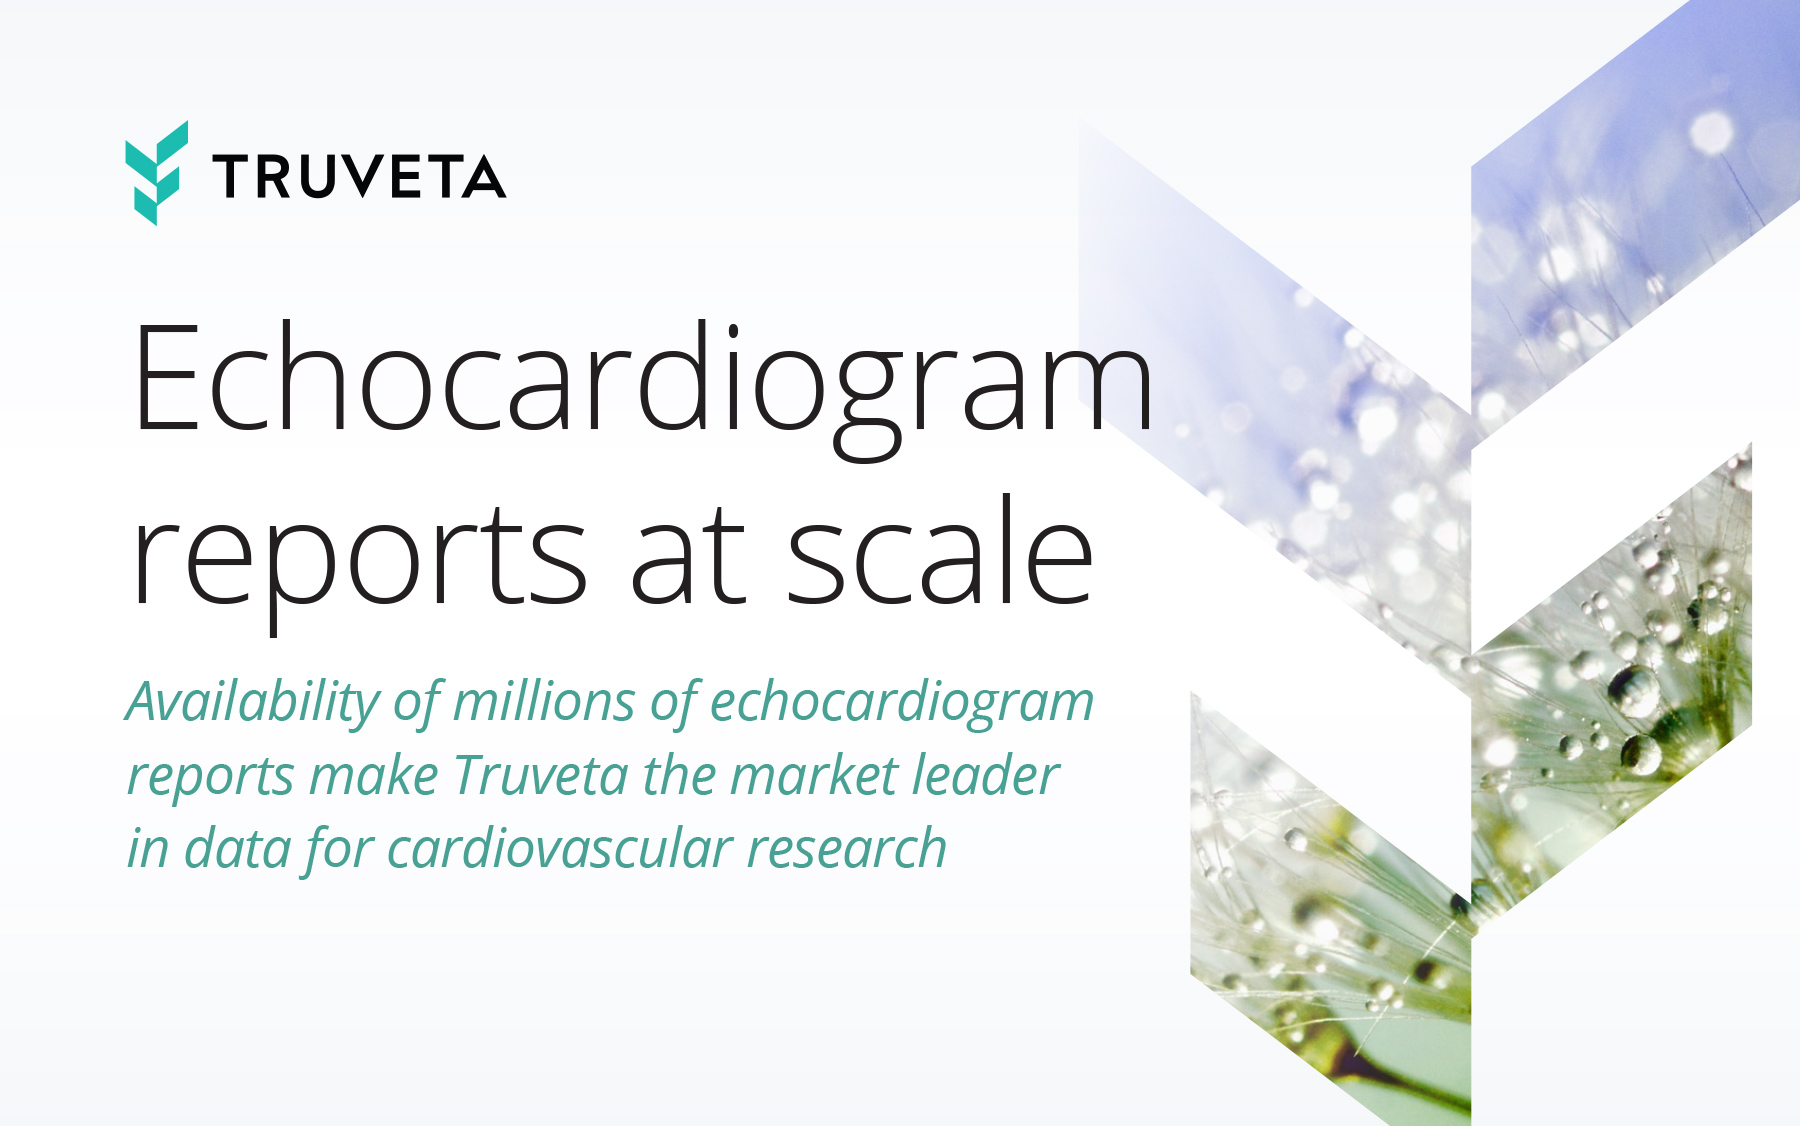 Availability of millions of echocardiogram reports makes Truveta the market leader in cardiovascular research